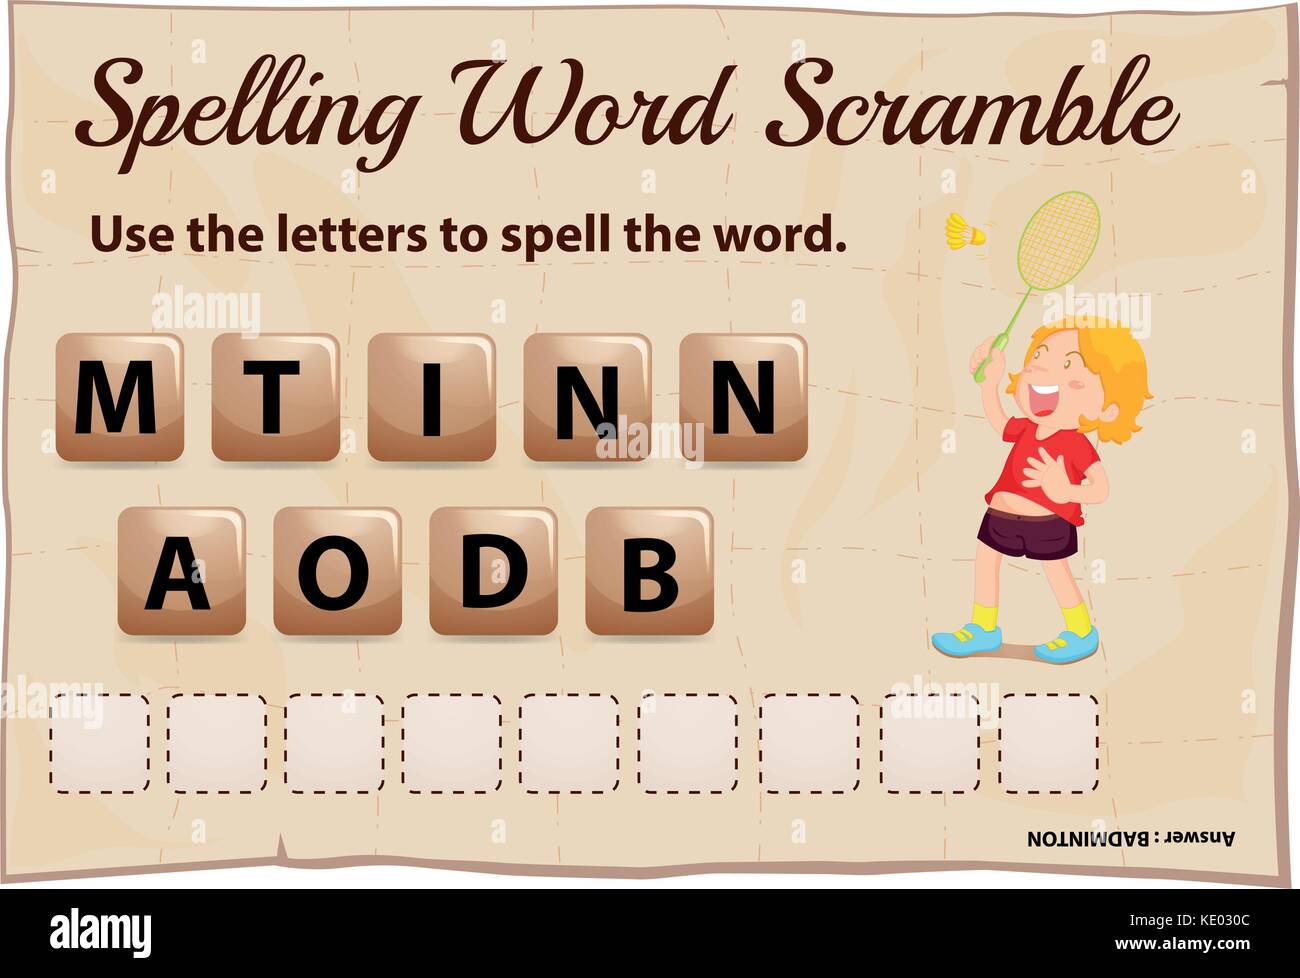 Spelling word scramble game with word badminton illustration Stock Vector